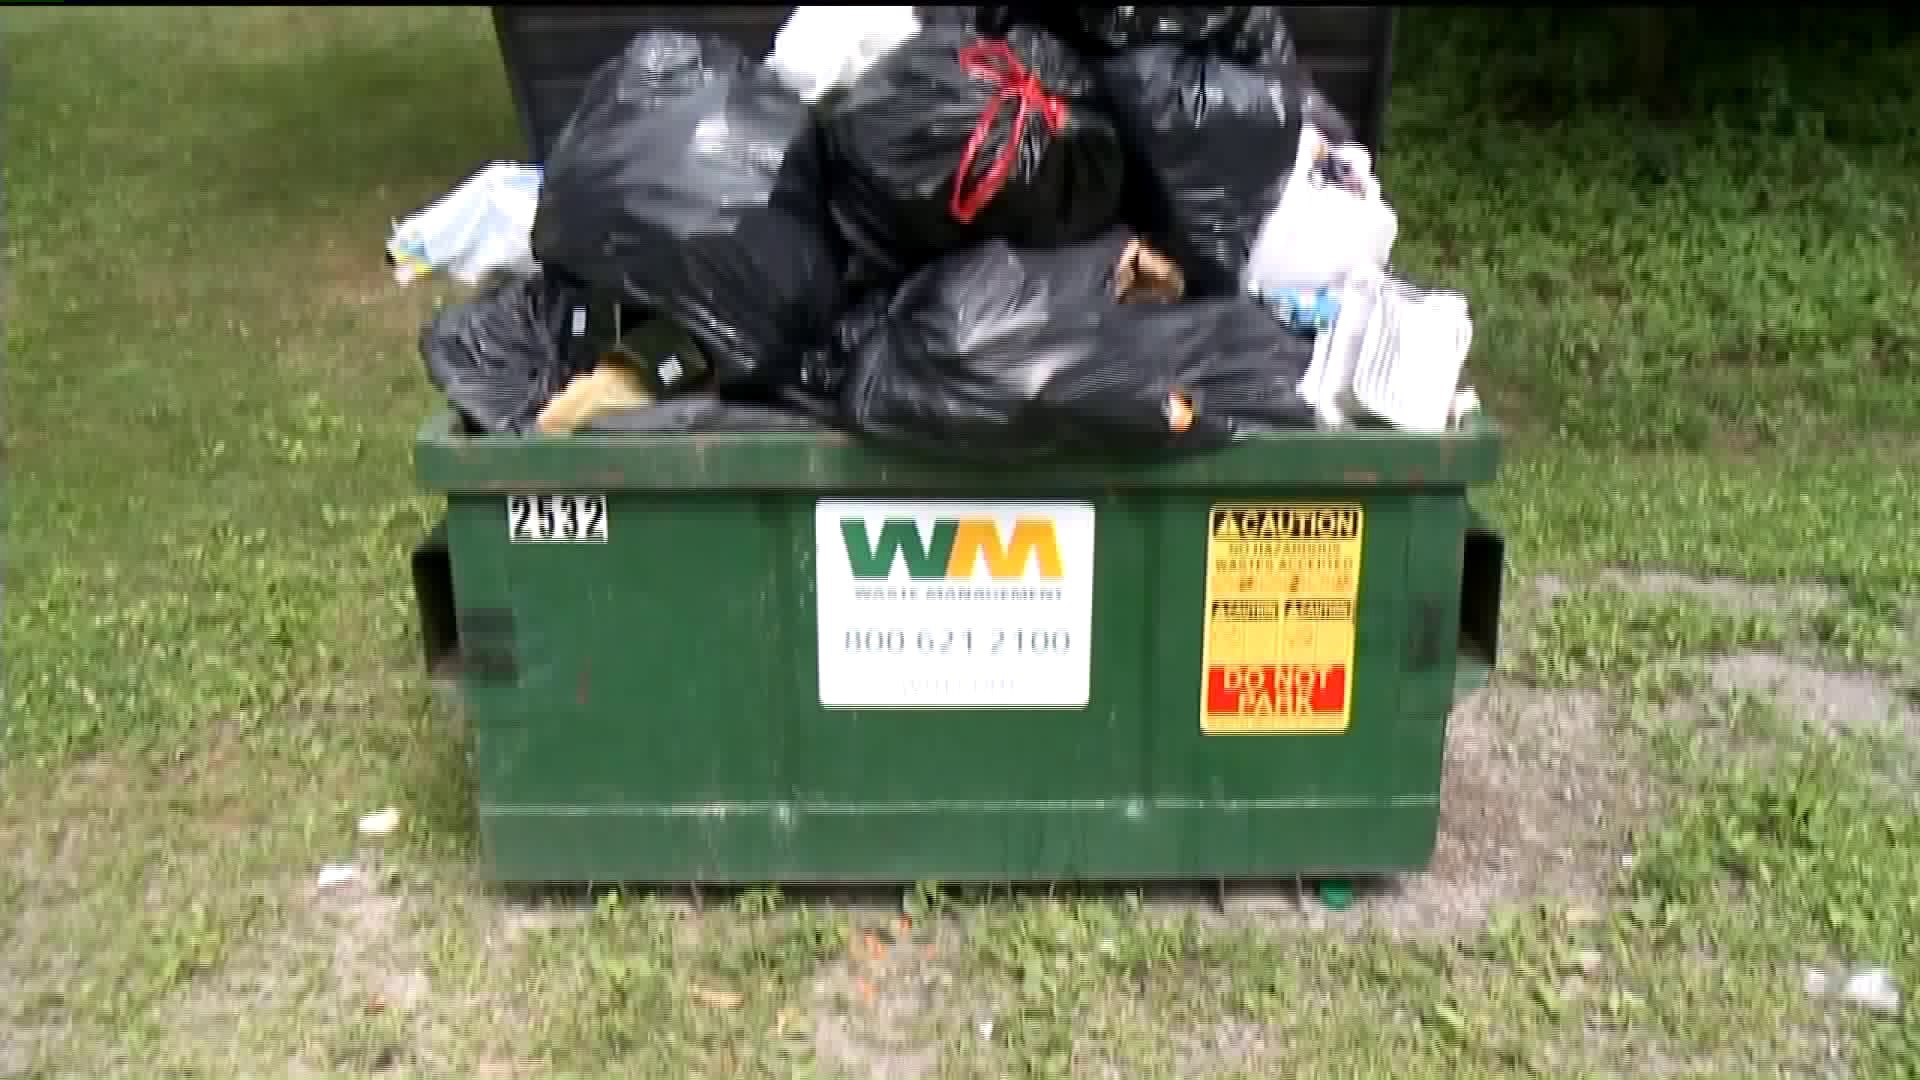 Community Tries to Clean Up After Holiday Celebration in the Poconos